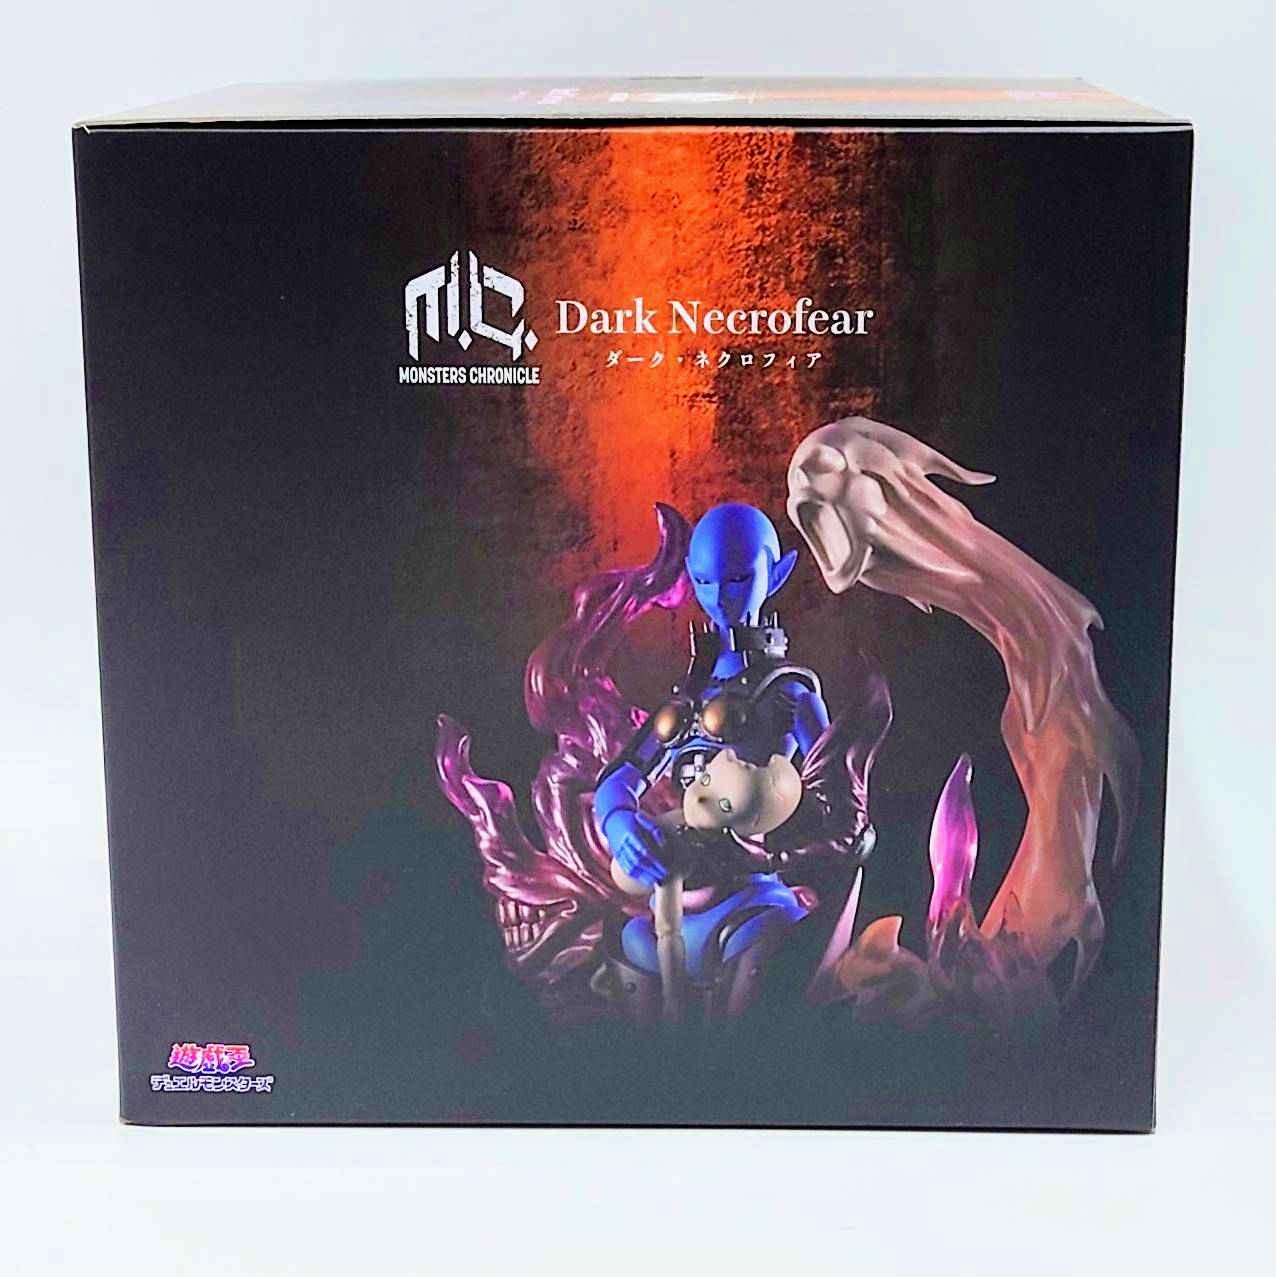 MONSTERS CHRONICLE Yu-Gi-Oh! Duel Monsters Dark Necrofear Completed Figure, animota